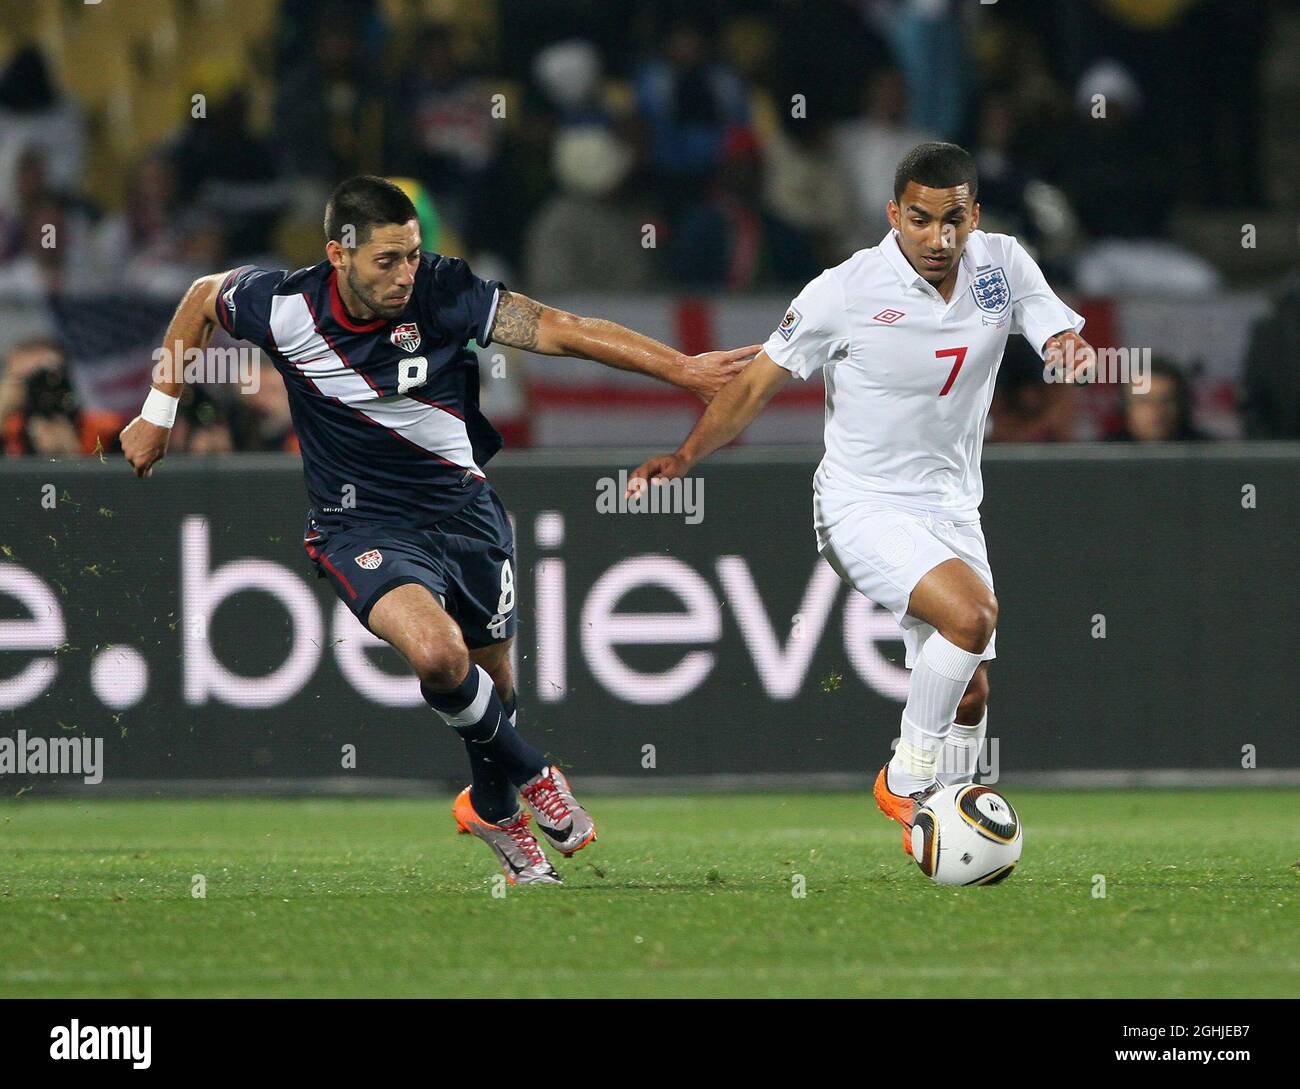 England's Aaron Lennon tussles with USA's Clint Dempsey during the FIFA World Cup 2010, Group C match between England v USA at Royal Bafokeng Stadium, Rustenburg, South Africa. Stock Photo